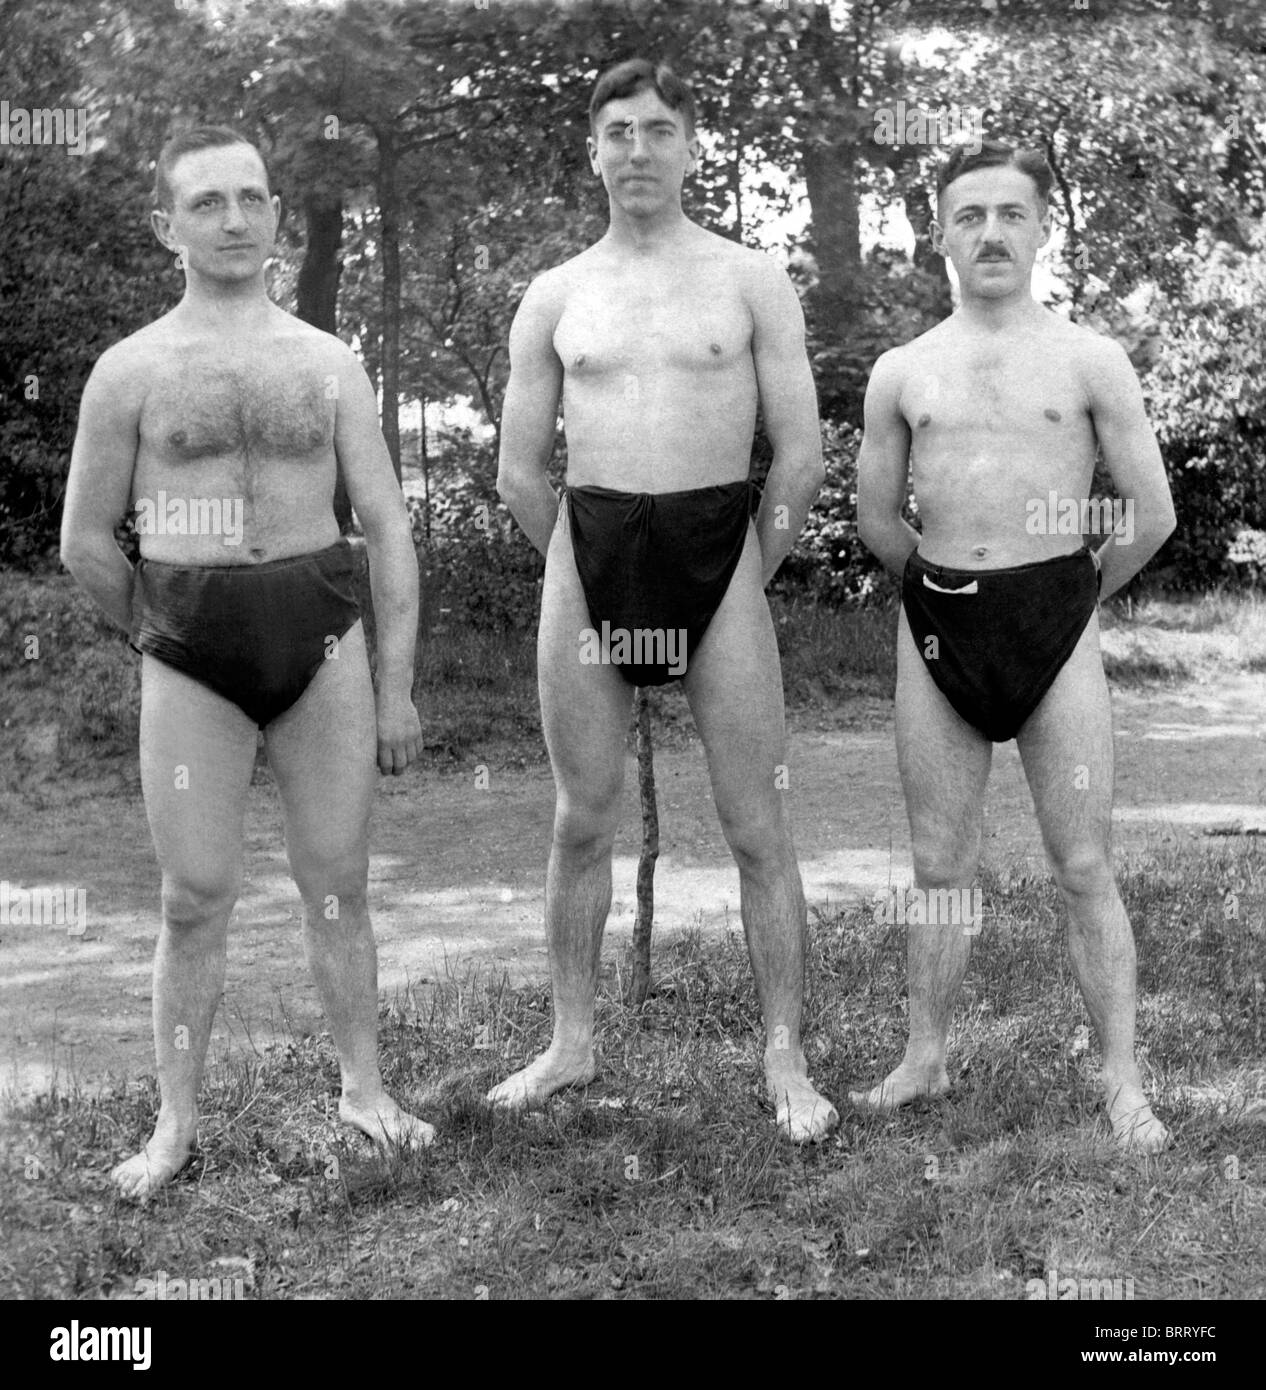 Men in bathing suits, historic photograph, around 1916 Stock Photo